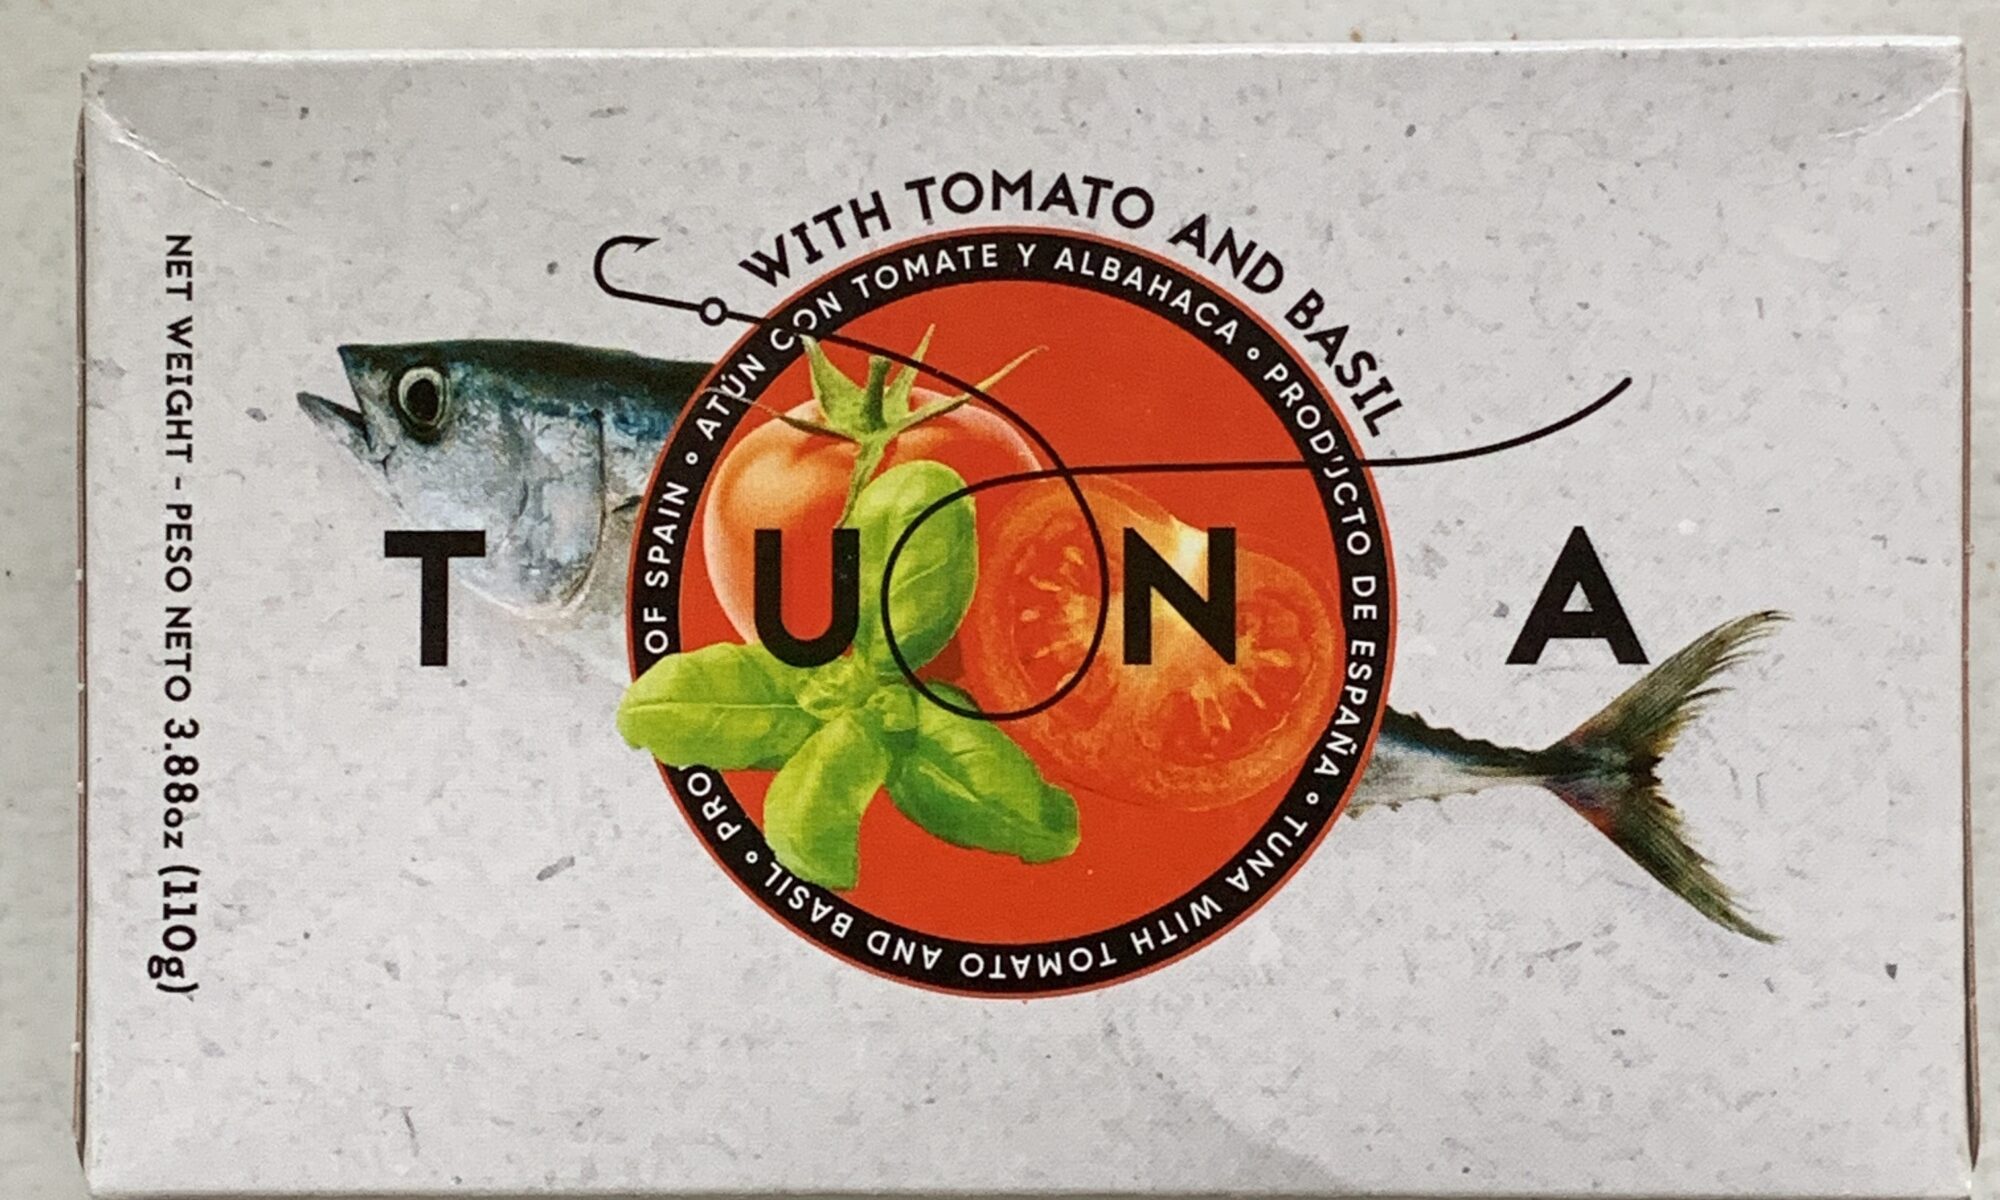 Image of the front of a package of Don Gastronom (La Narval) Yellowfin Tuna with Tomato and Basil